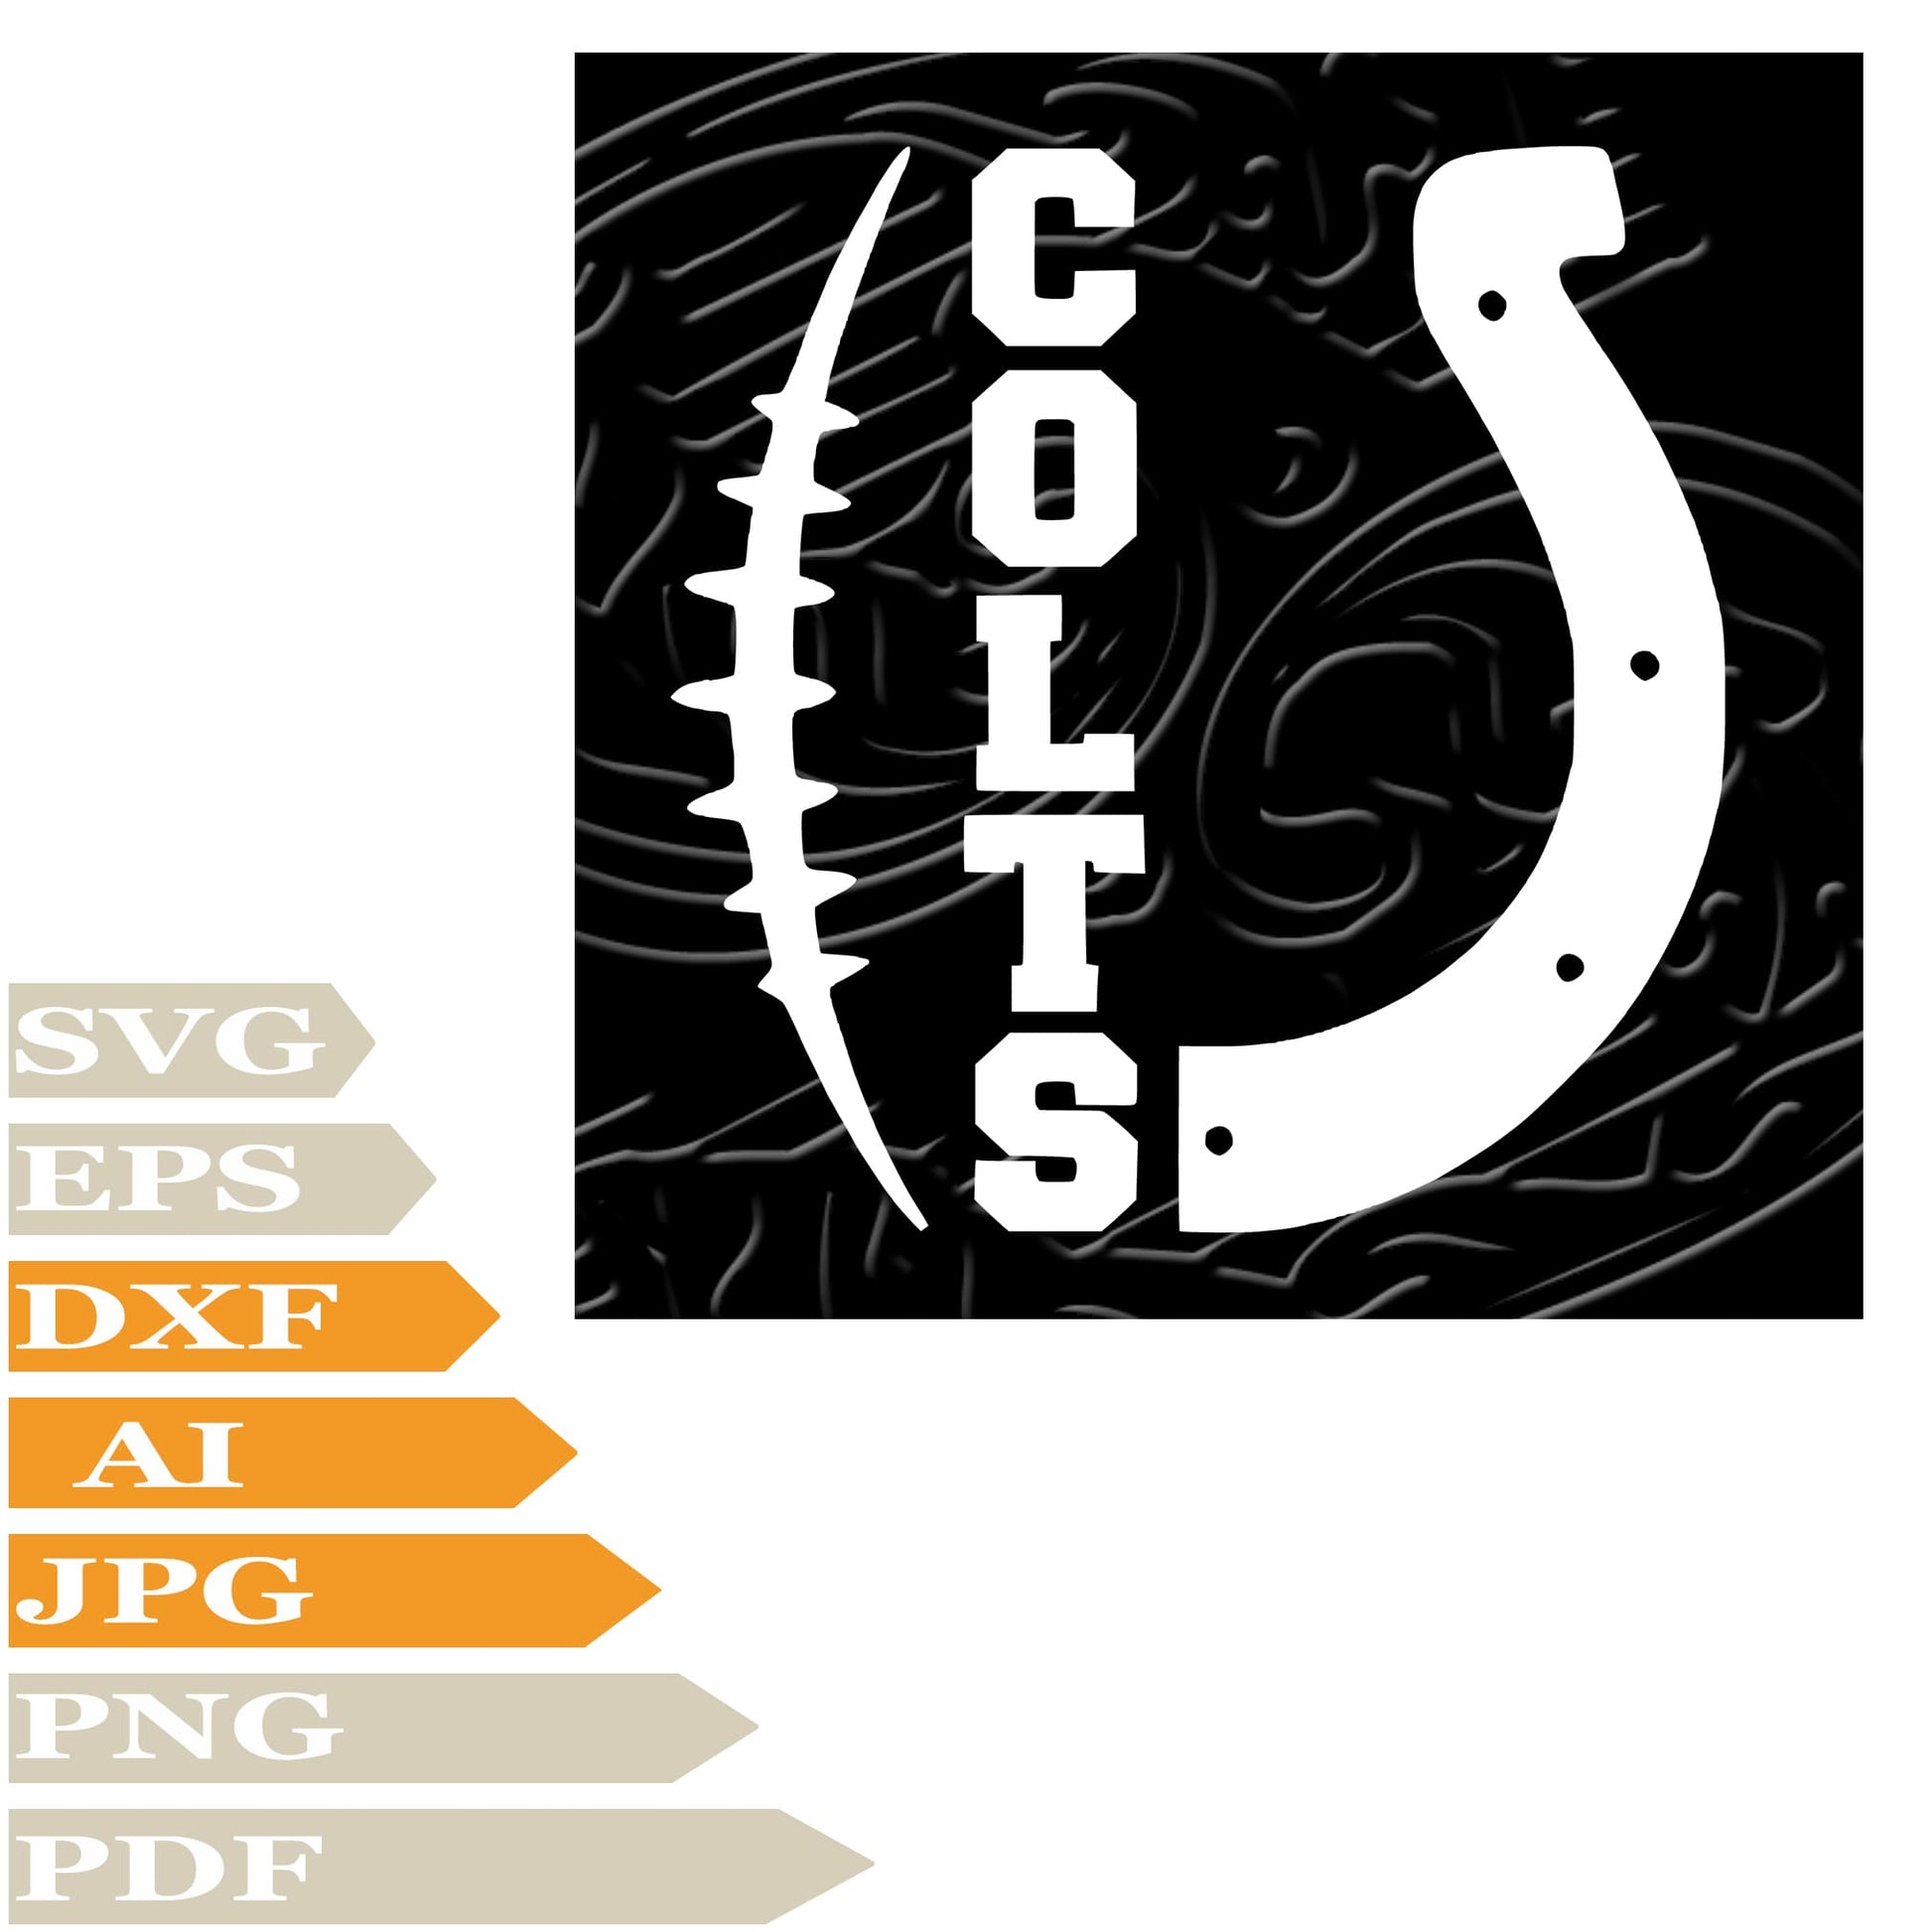 Colts Football, Indianapolis Colts Logo Svg File, Image Cut, Png, For Tattoo, Silhouette, Digital Vector Download, Cut File, Clipart, For Cricut